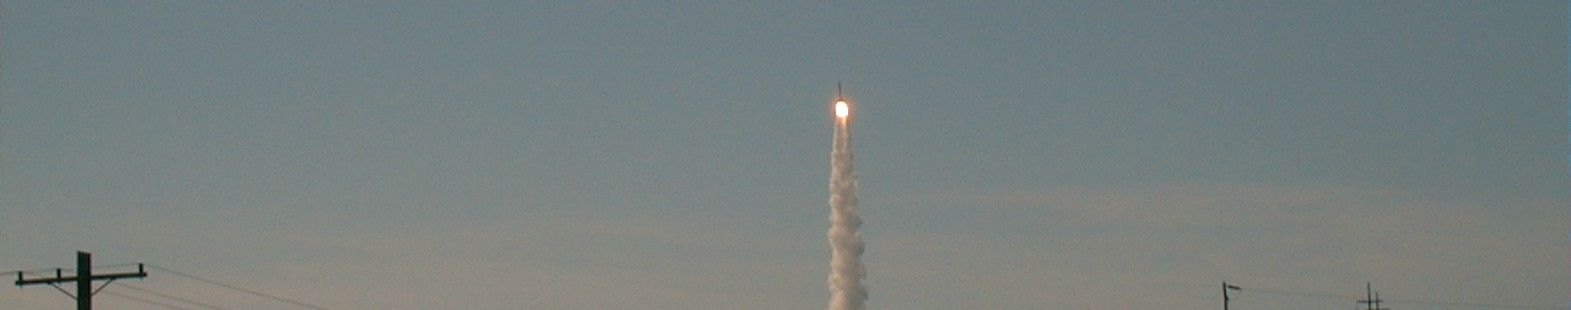 The MOPITT Terra spacecraft launch showing the Atlas IIAS lift-off on 18th December 1999 (Photo credit: Jim Drummond)